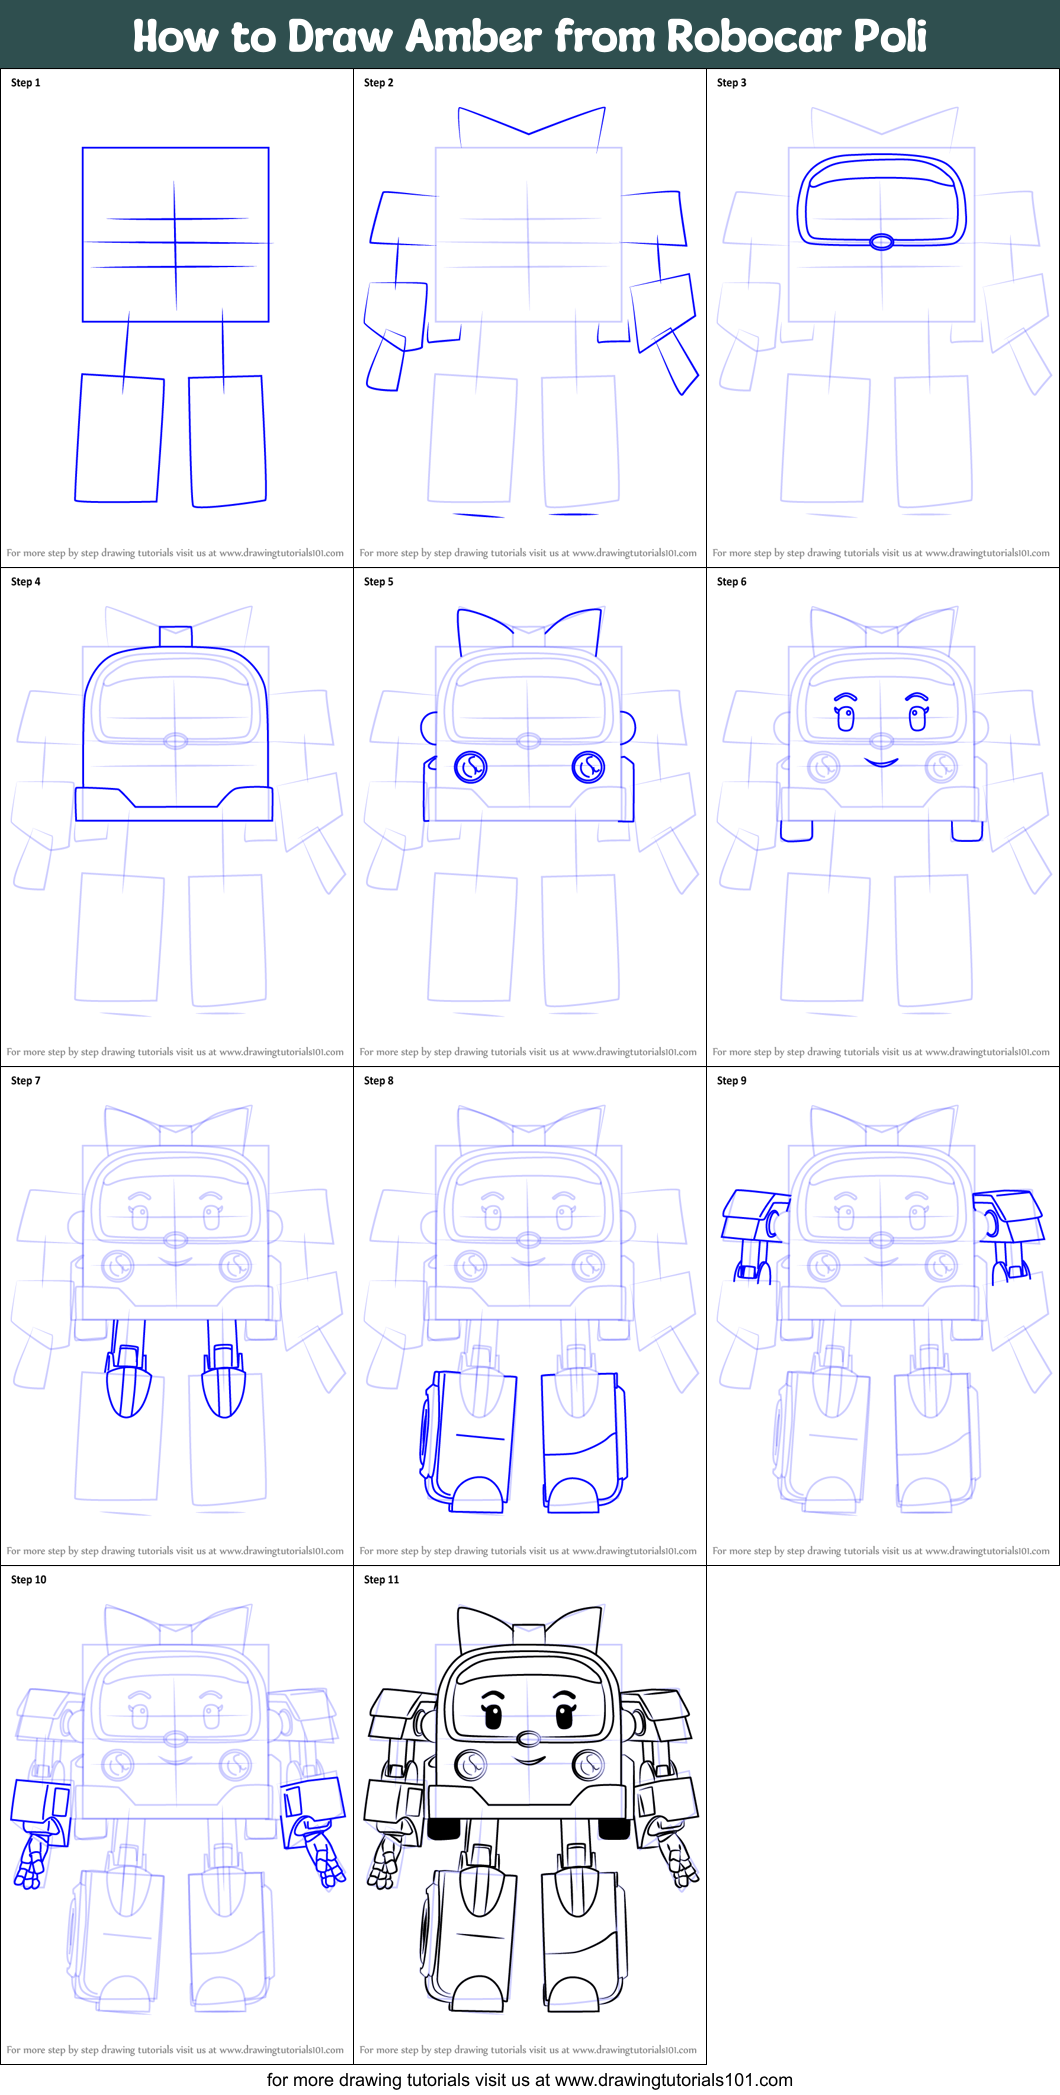 How to Draw Amber from Robocar Poli printable step by step drawing